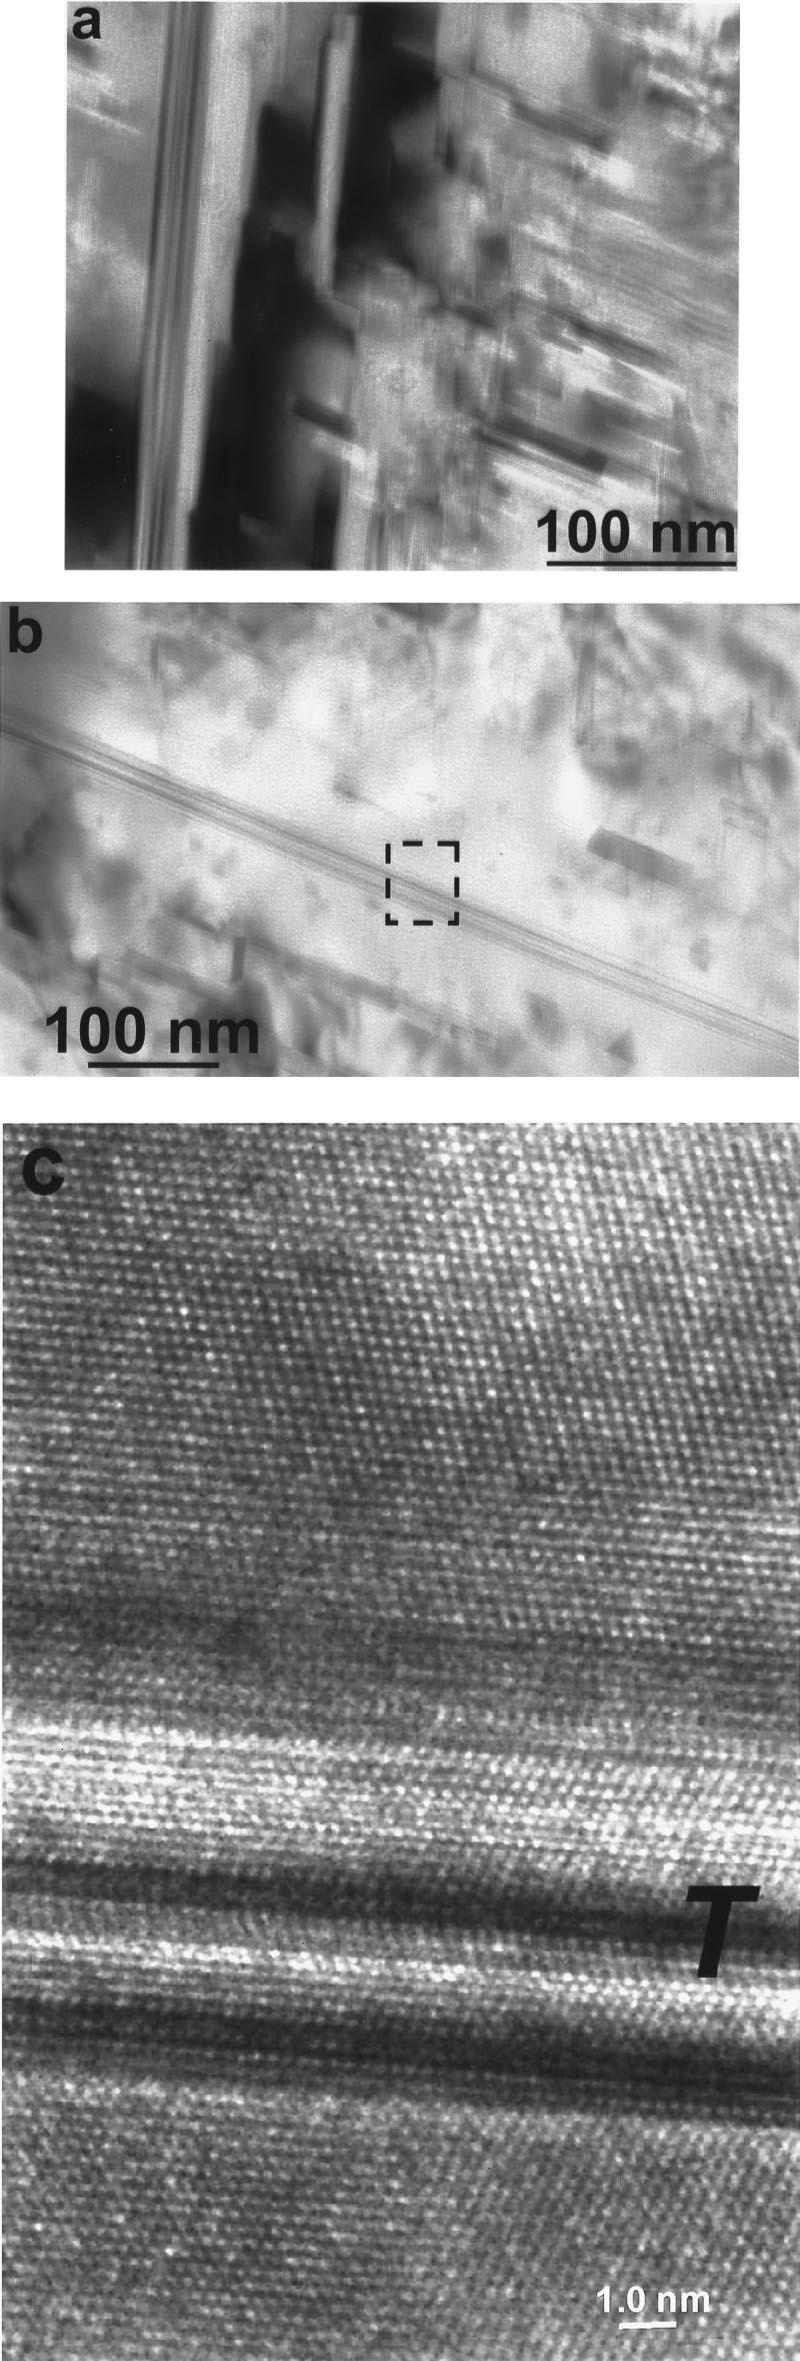 2914 J. Appl. Phys., Vol. 91, No. 5, 1 March 2002 Bo et al. FIG. 7. High-magnification bright-field TEM observations on polysilicon grains in a the control region and b the cantilever region.